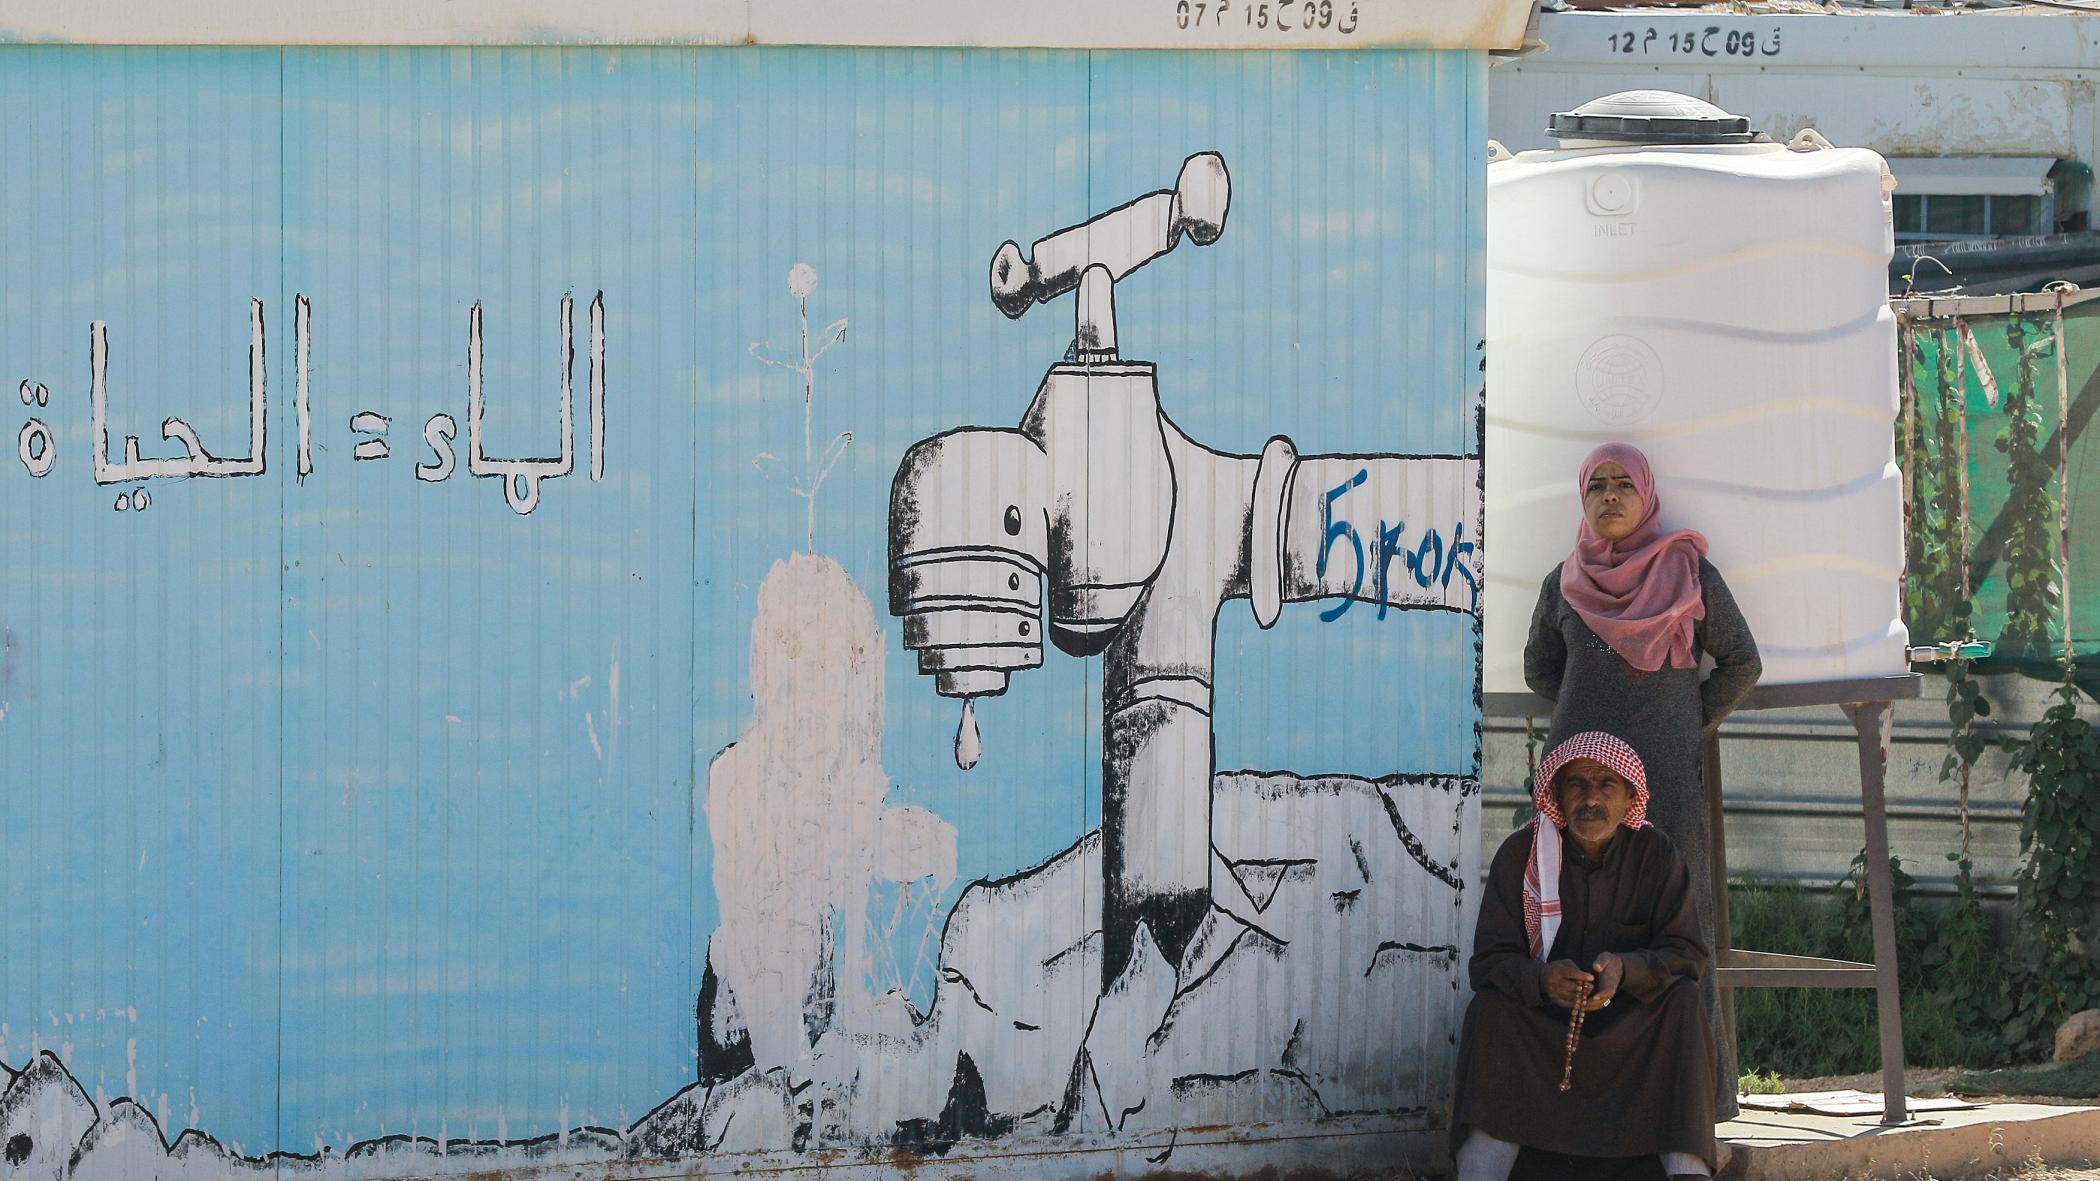 A woman stands behind a sitting man next to a cistern and a mural on a temporary shelter showing a dripping tap with a caption reading in Arabic "Water = Life", at the Zaatari refugee camp in northern Jordan.